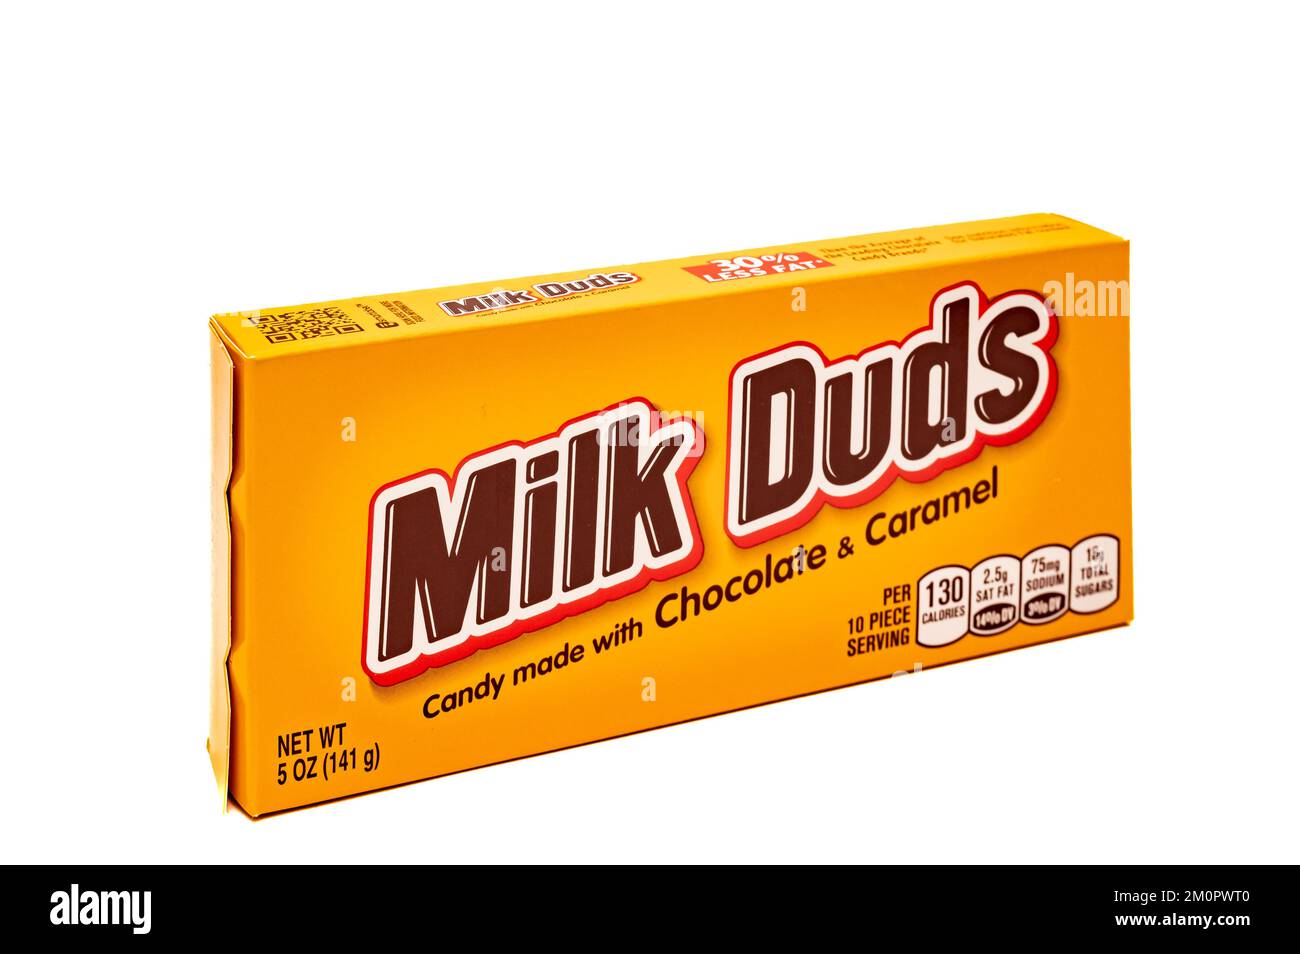 A box of Milk Duds candy made with Chocolate & Caramel by the Hershey Company, a fun tasty treat isolated on white Stock Photo